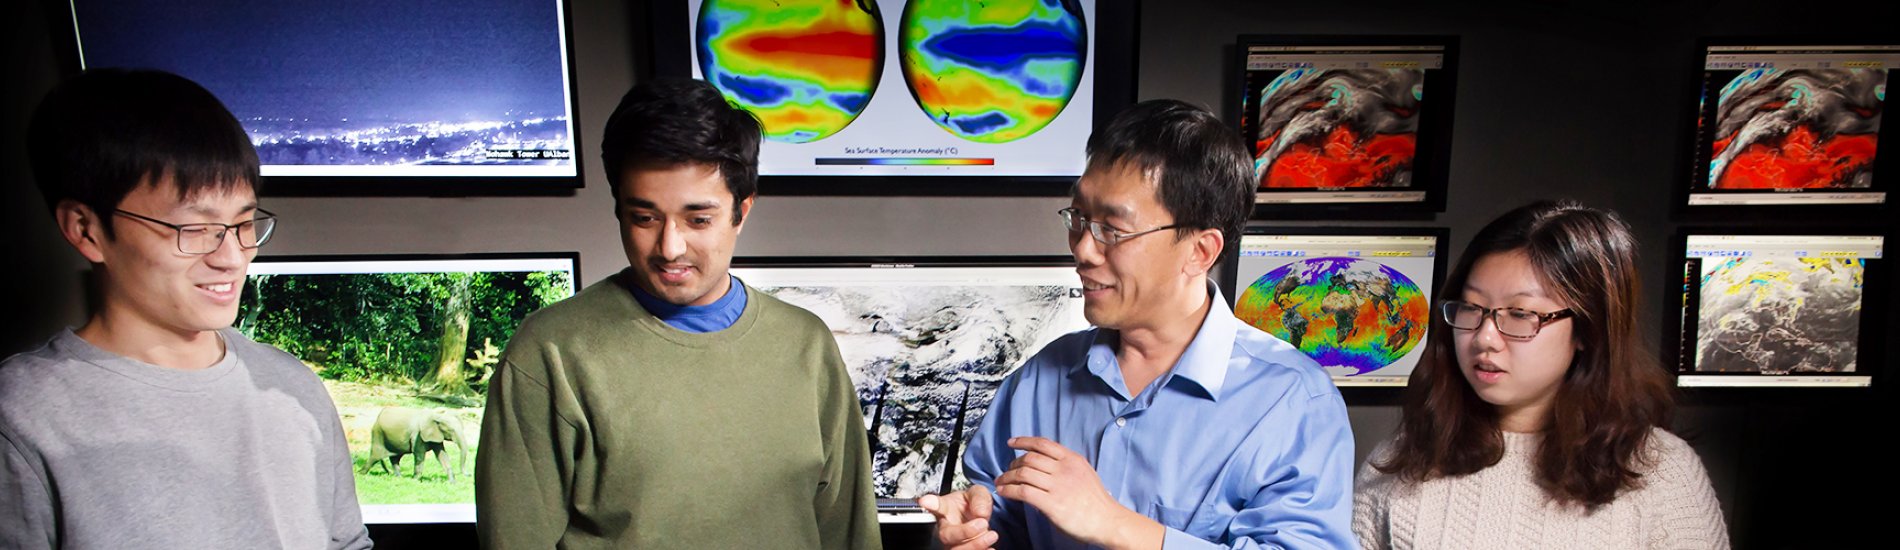 A UAlbany professor and students studying climate maps.